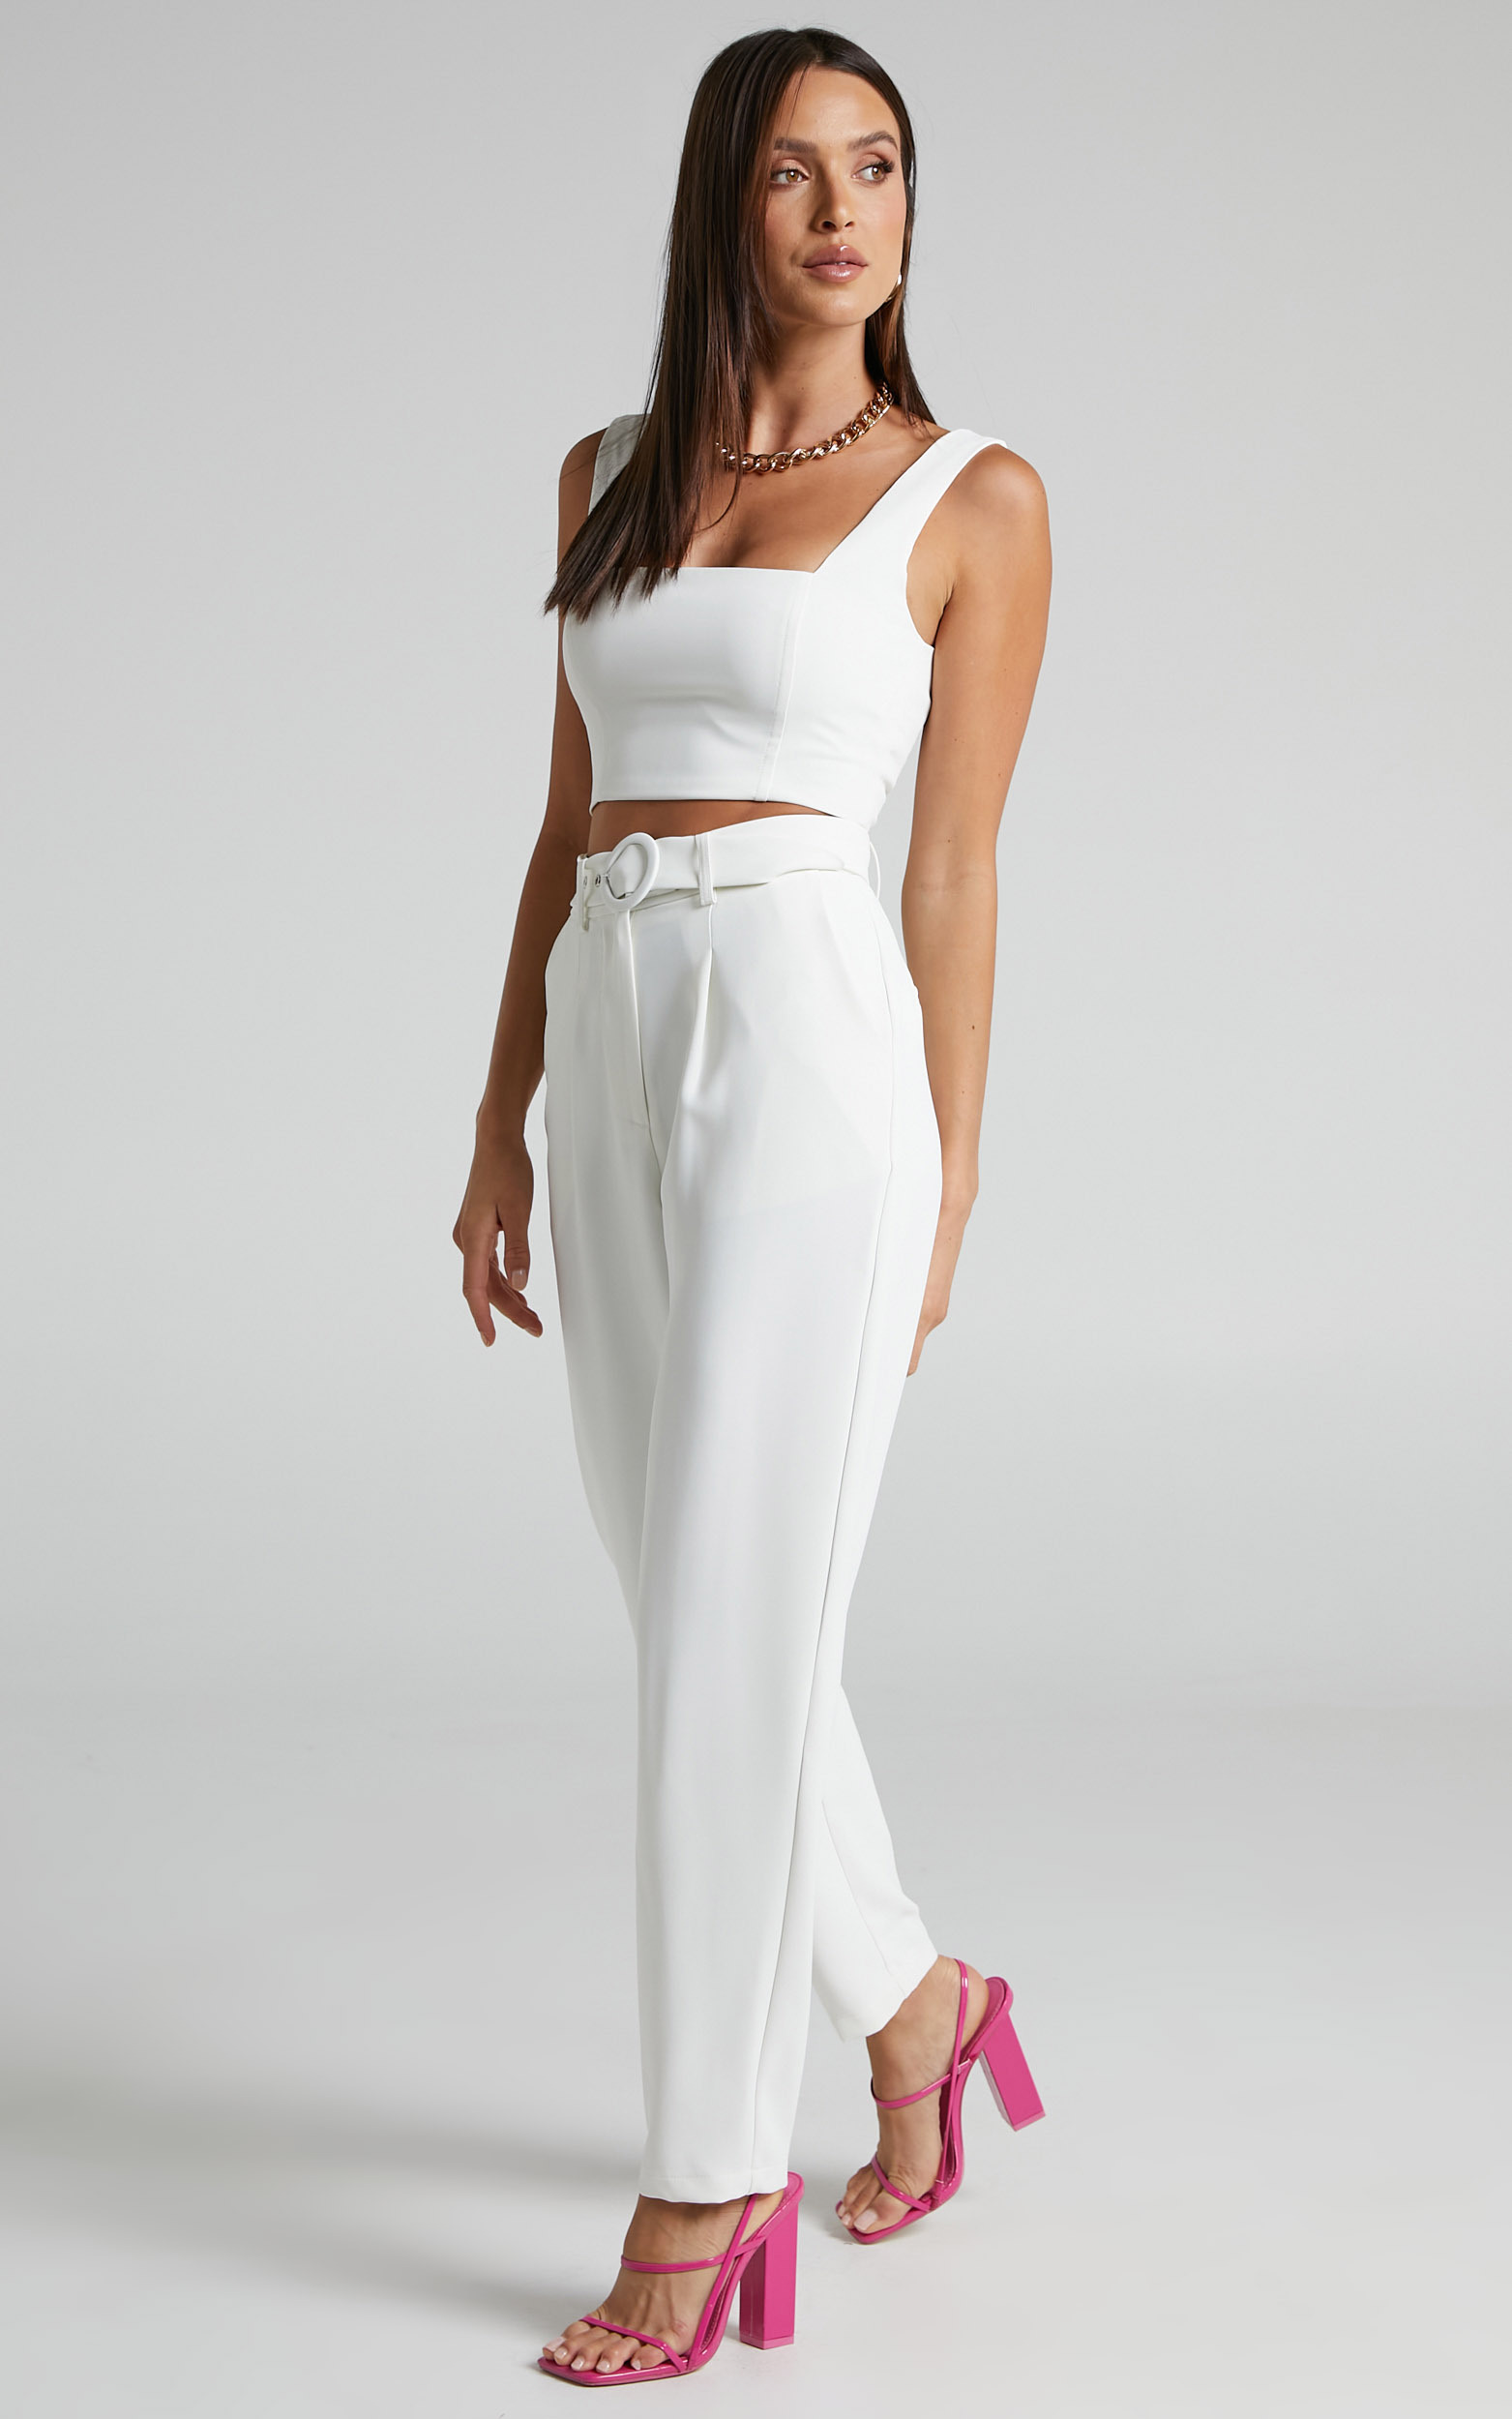 Reyna Two Piece Set - Crop Top and Tailored Pants in White | Showpo USA